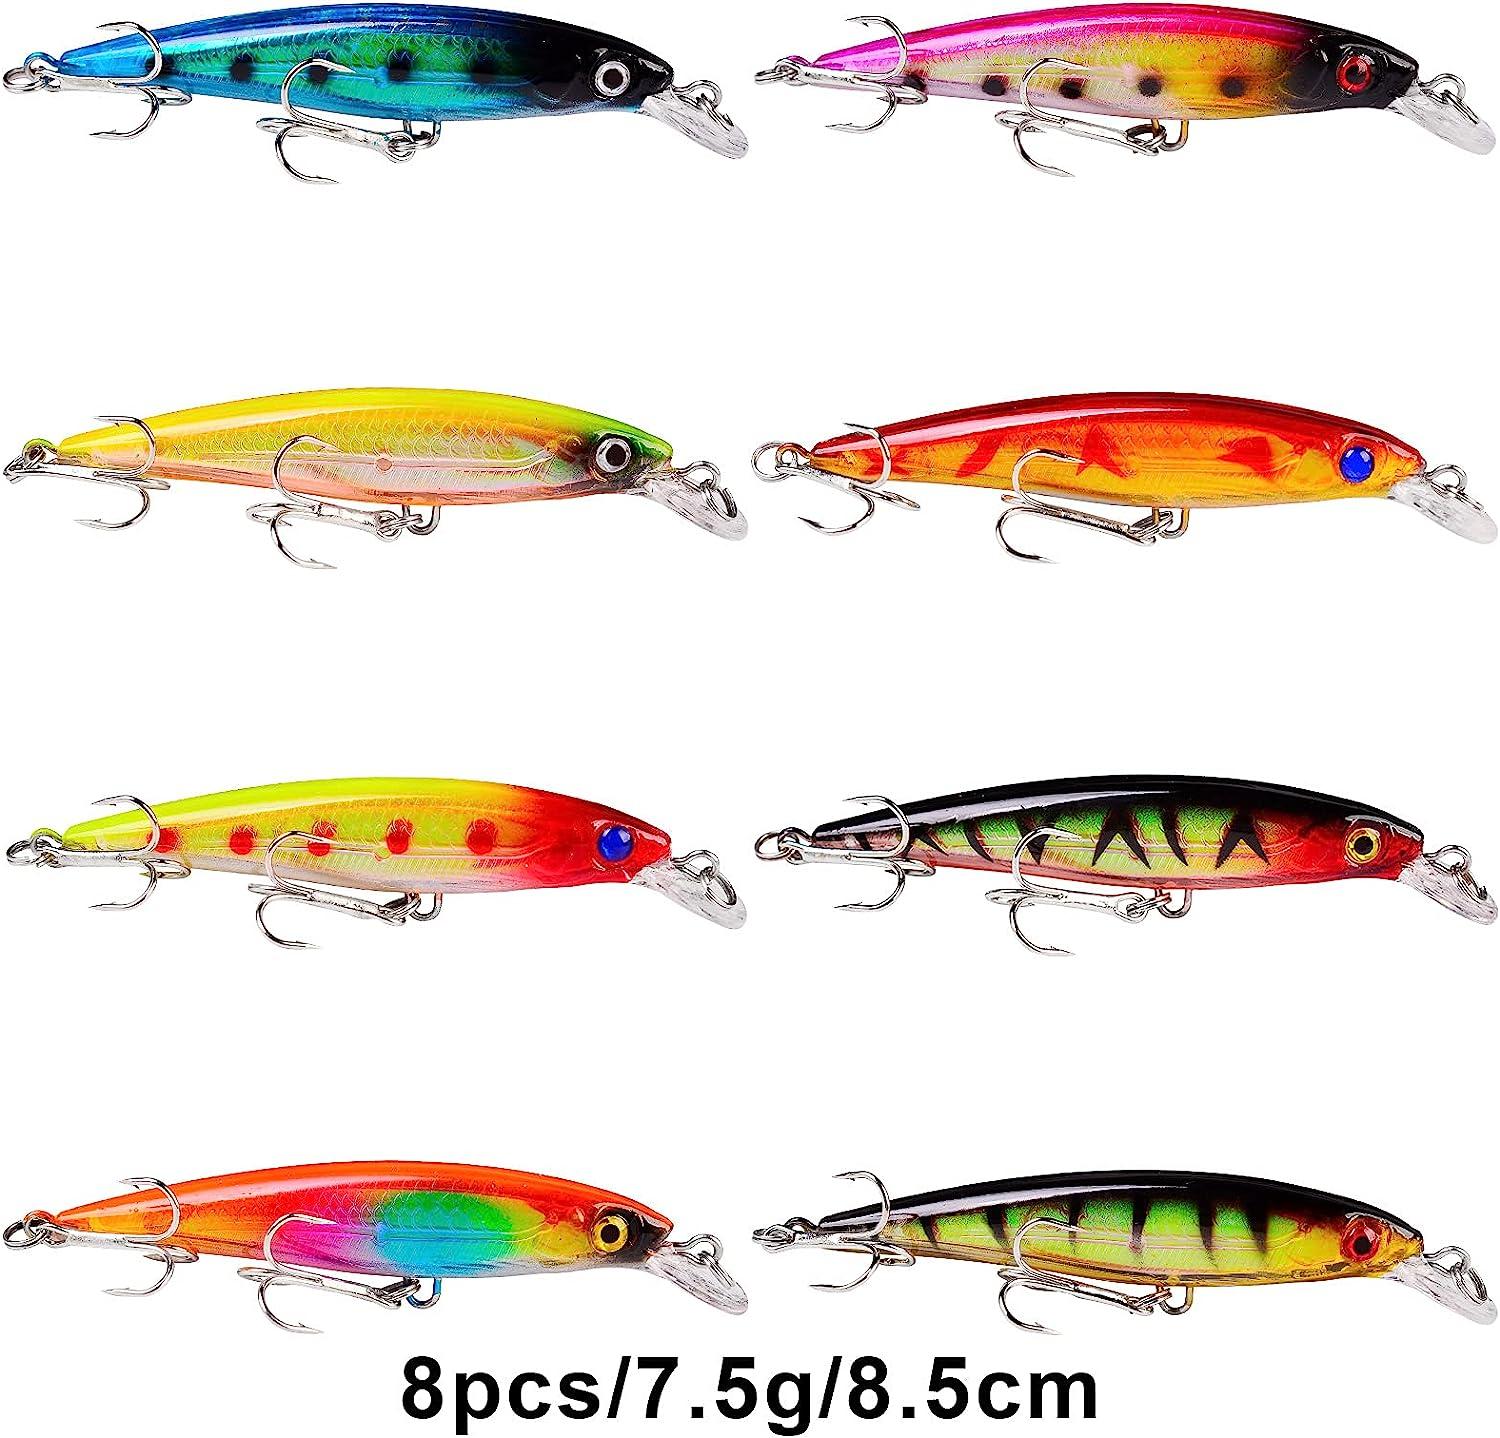 Fresh water fishing lures - sporting goods - by owner - sale